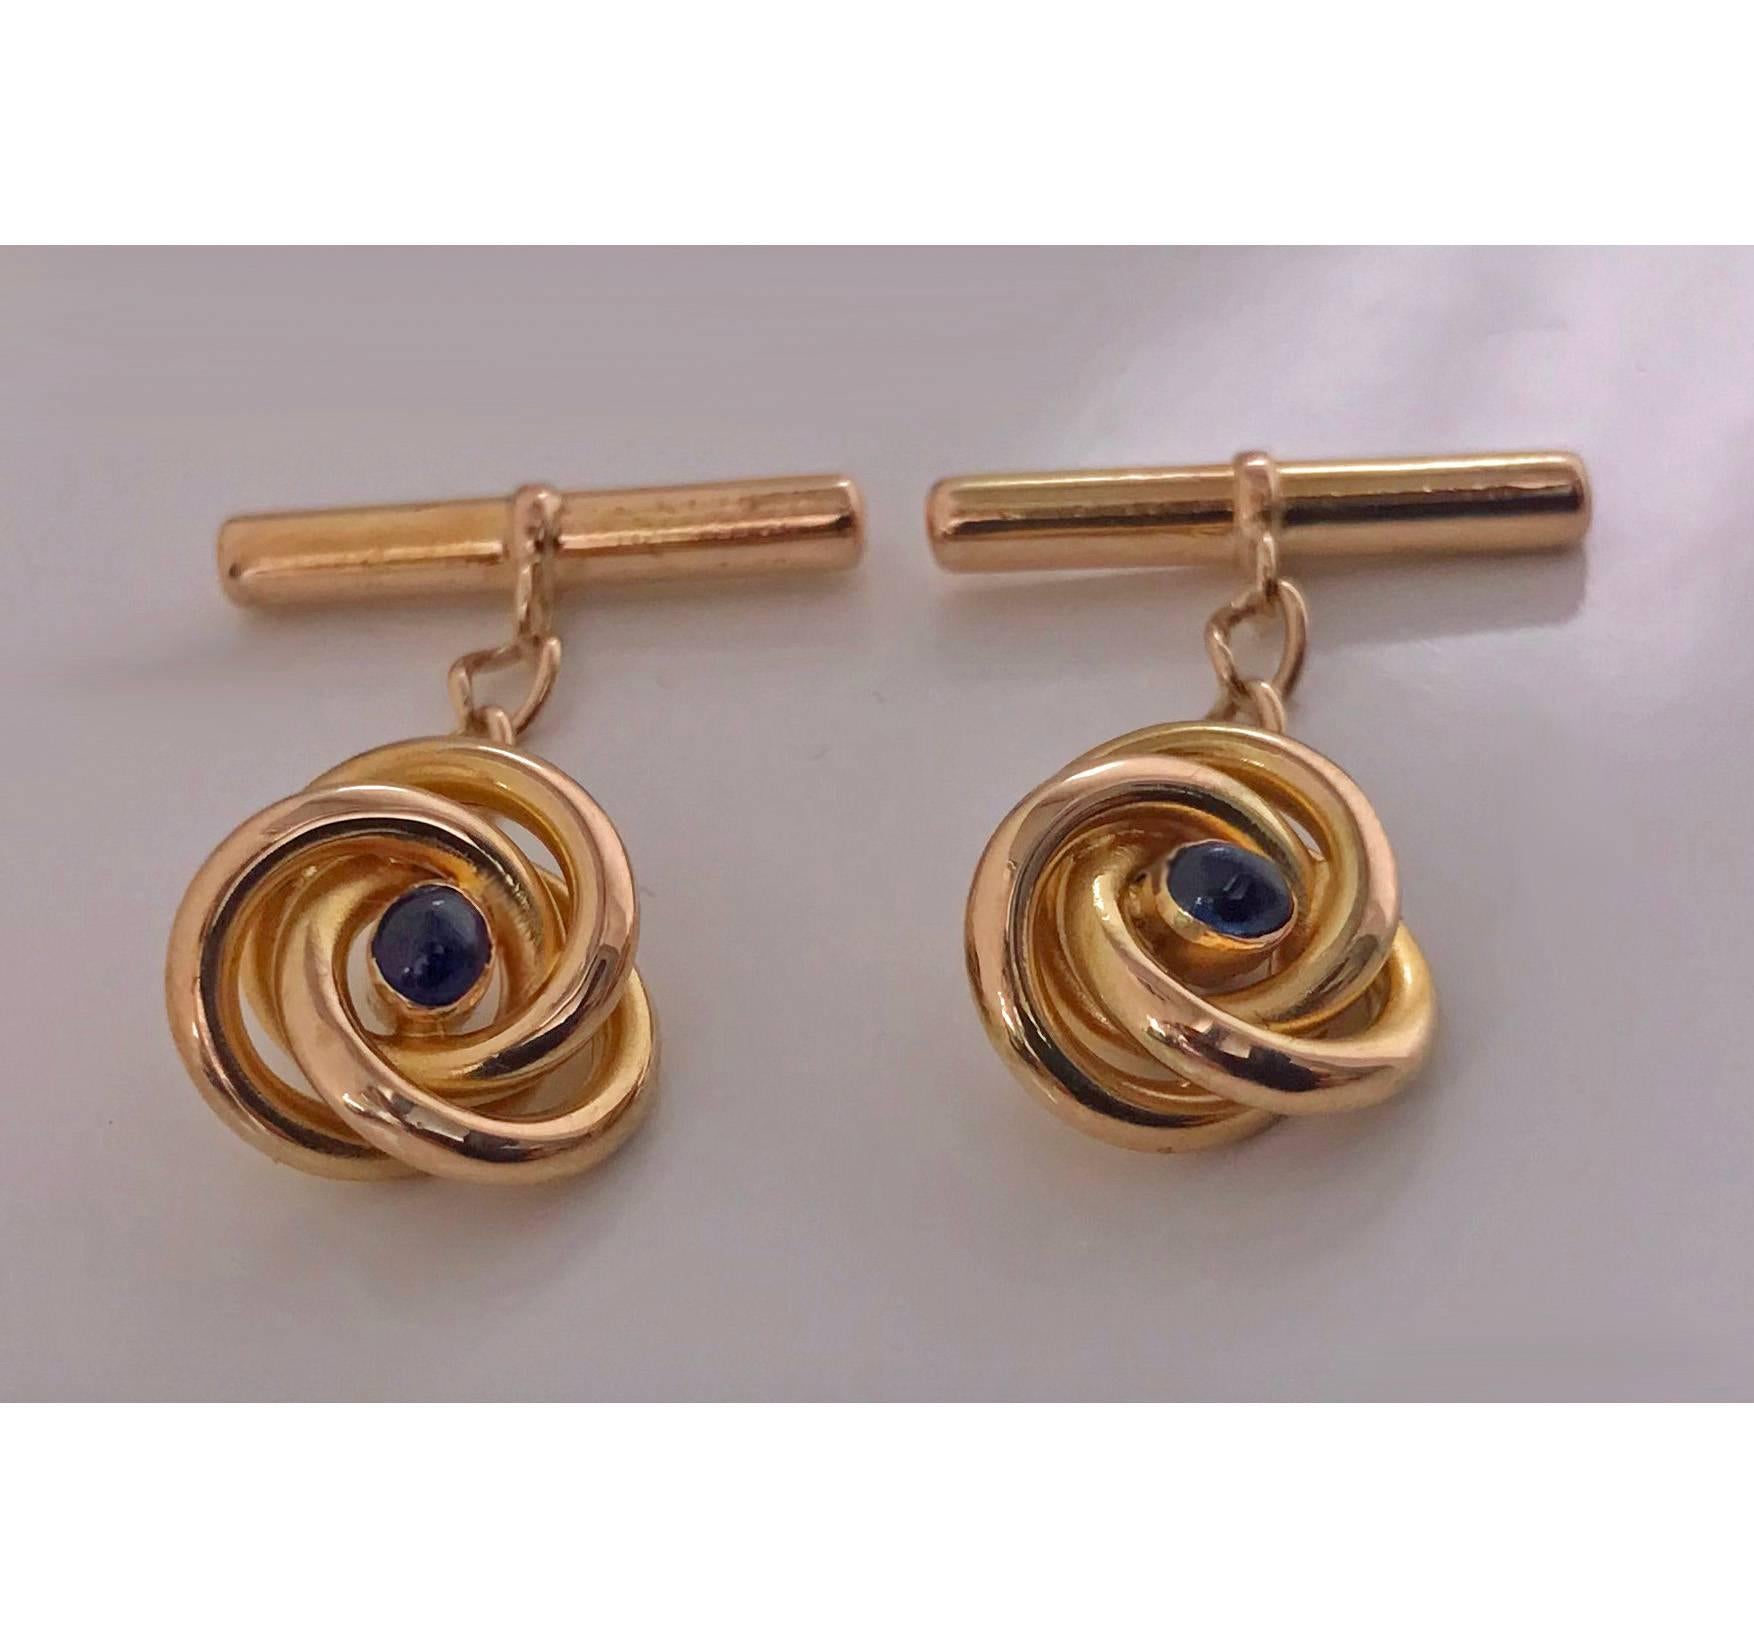 Pair of 18K (tested) Sapphire  Cufflinks, C.1930. Each of open swirl knot design, set with small oval cabochon blue sapphire, 14K t bar fitments chain link between. Total Item Weight: 4.59 gm. Continental mark, possibly French.